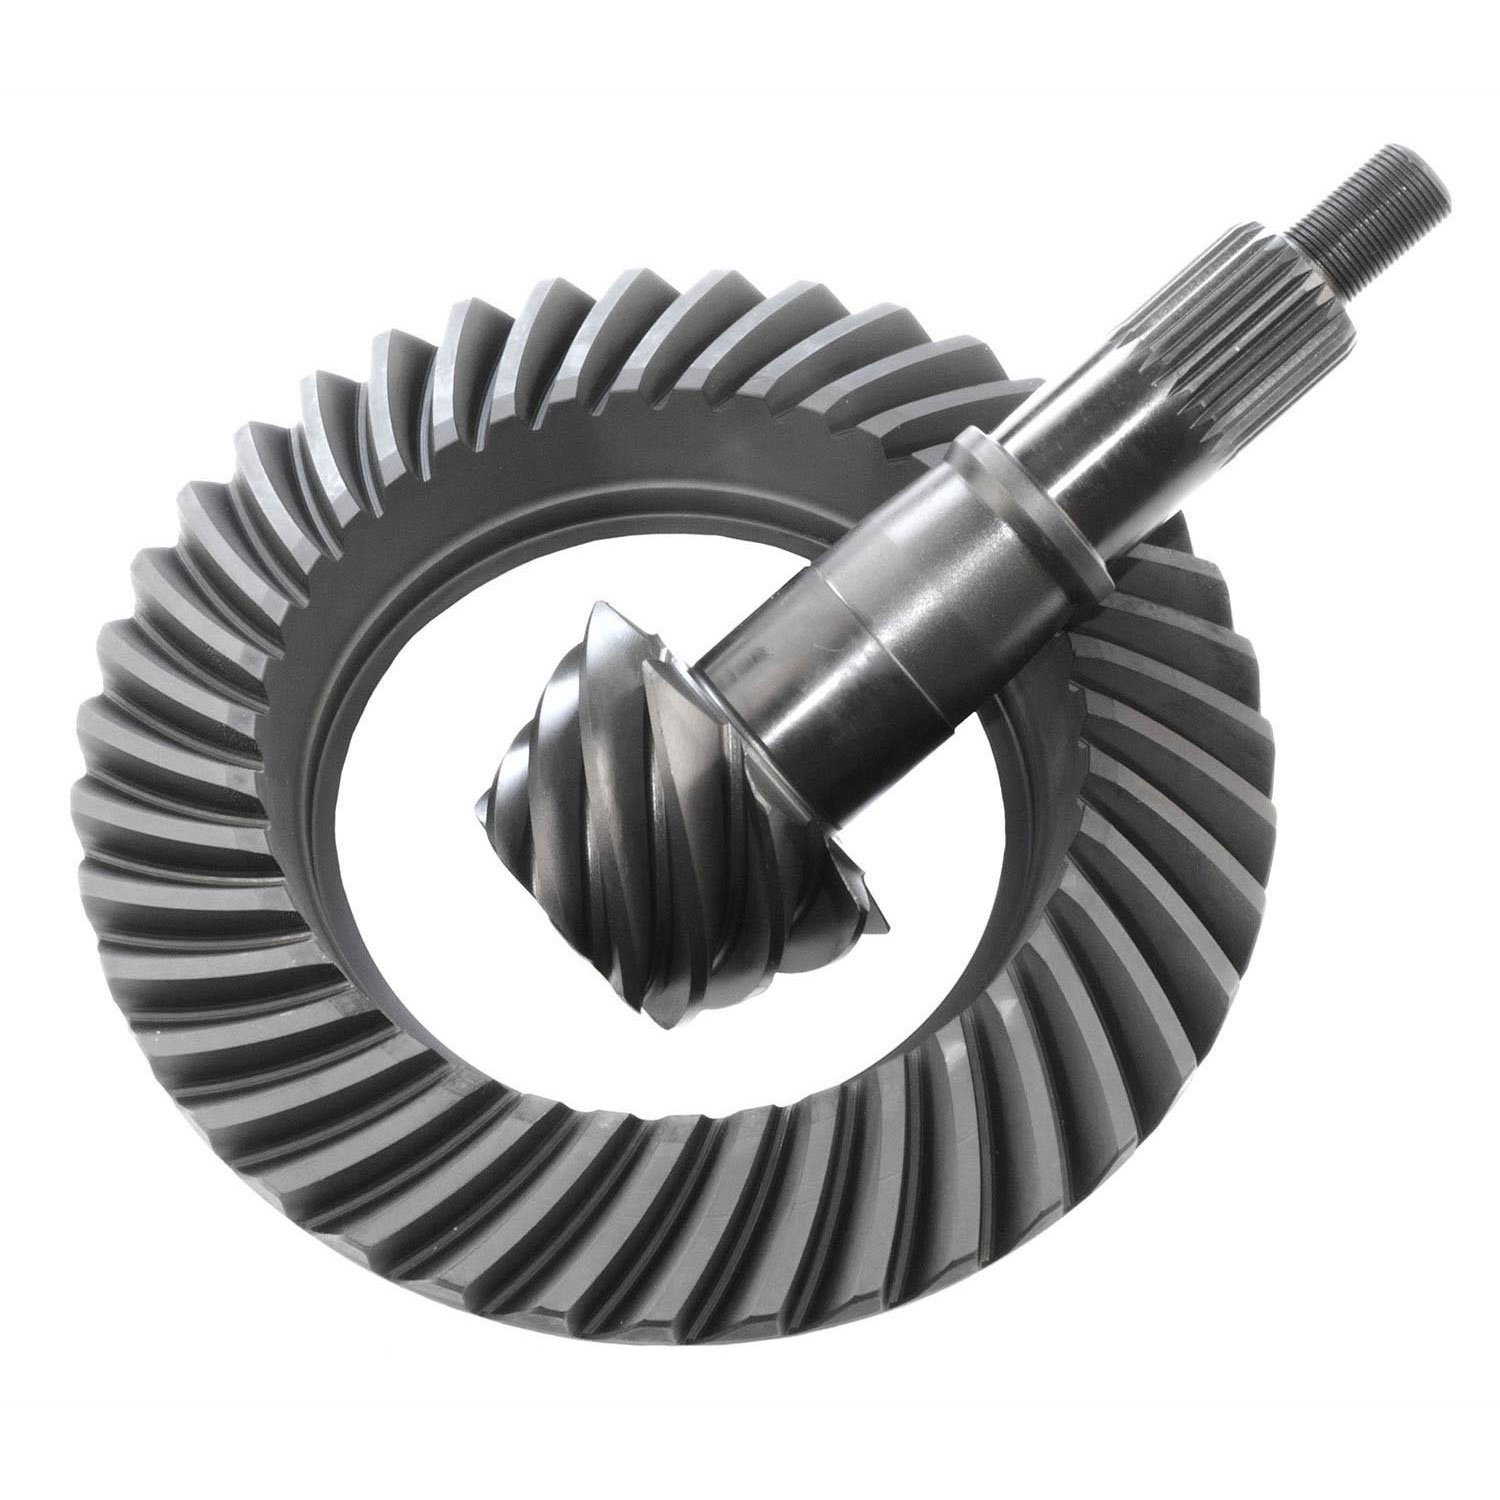 Ford Ring & Pinion Gear Set Ratio: 4.88